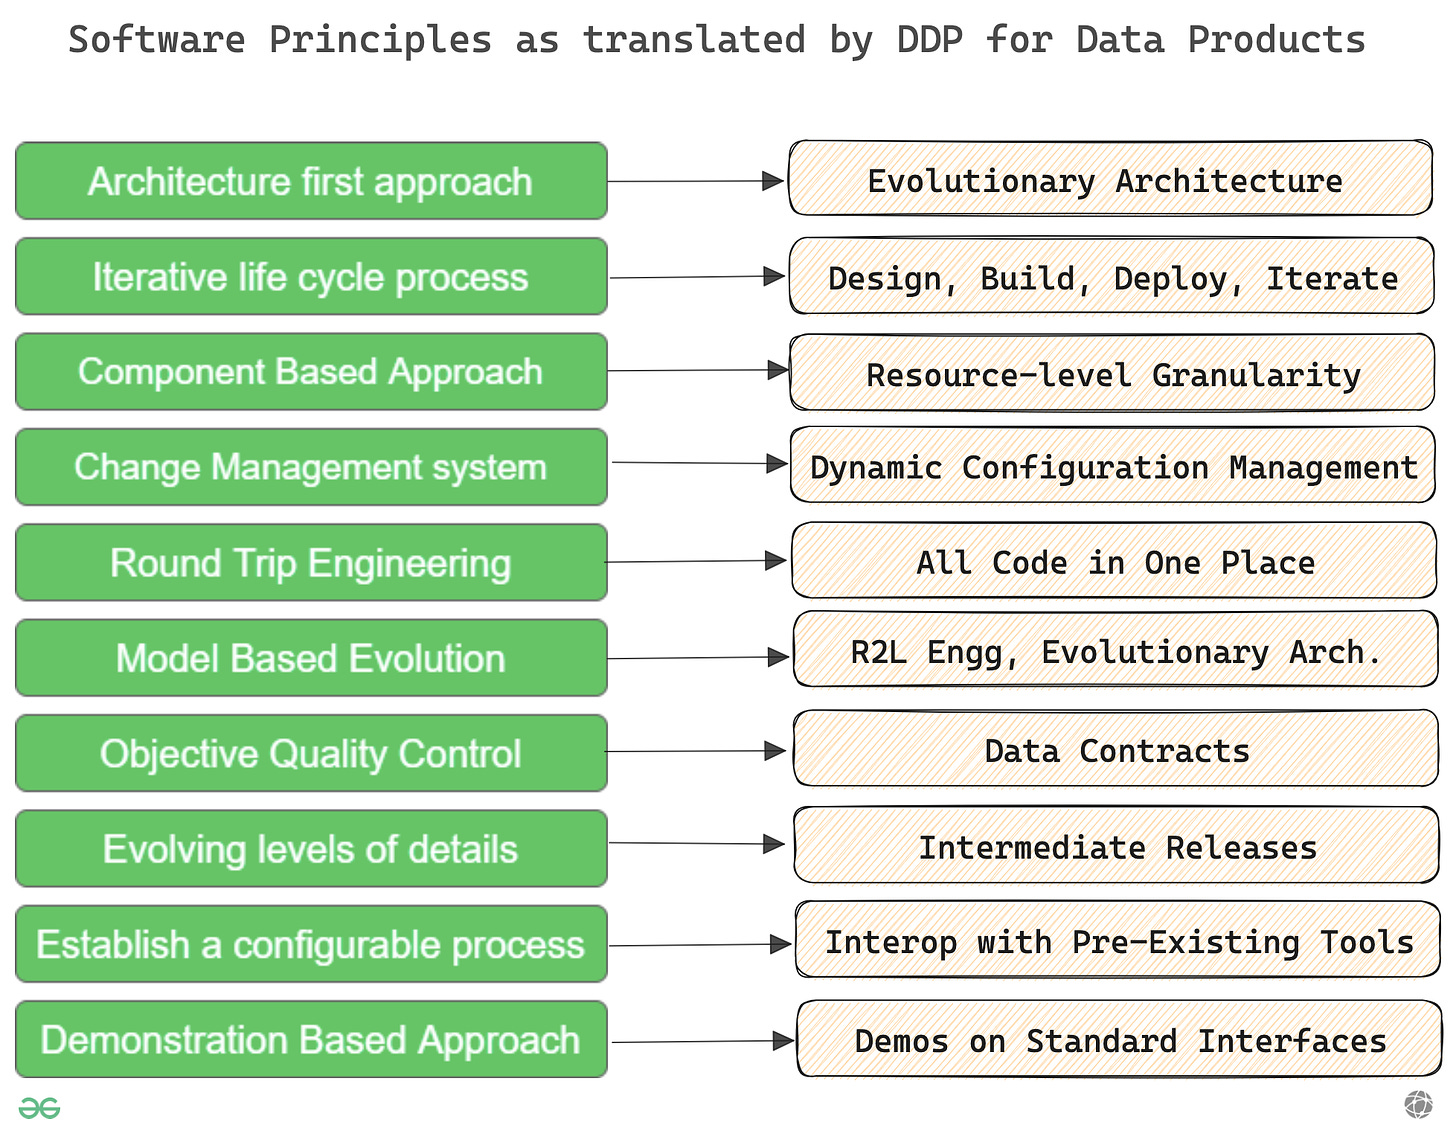 1:1 View of the Translation between Software Principles and Software for Data | Data Developer Platforms